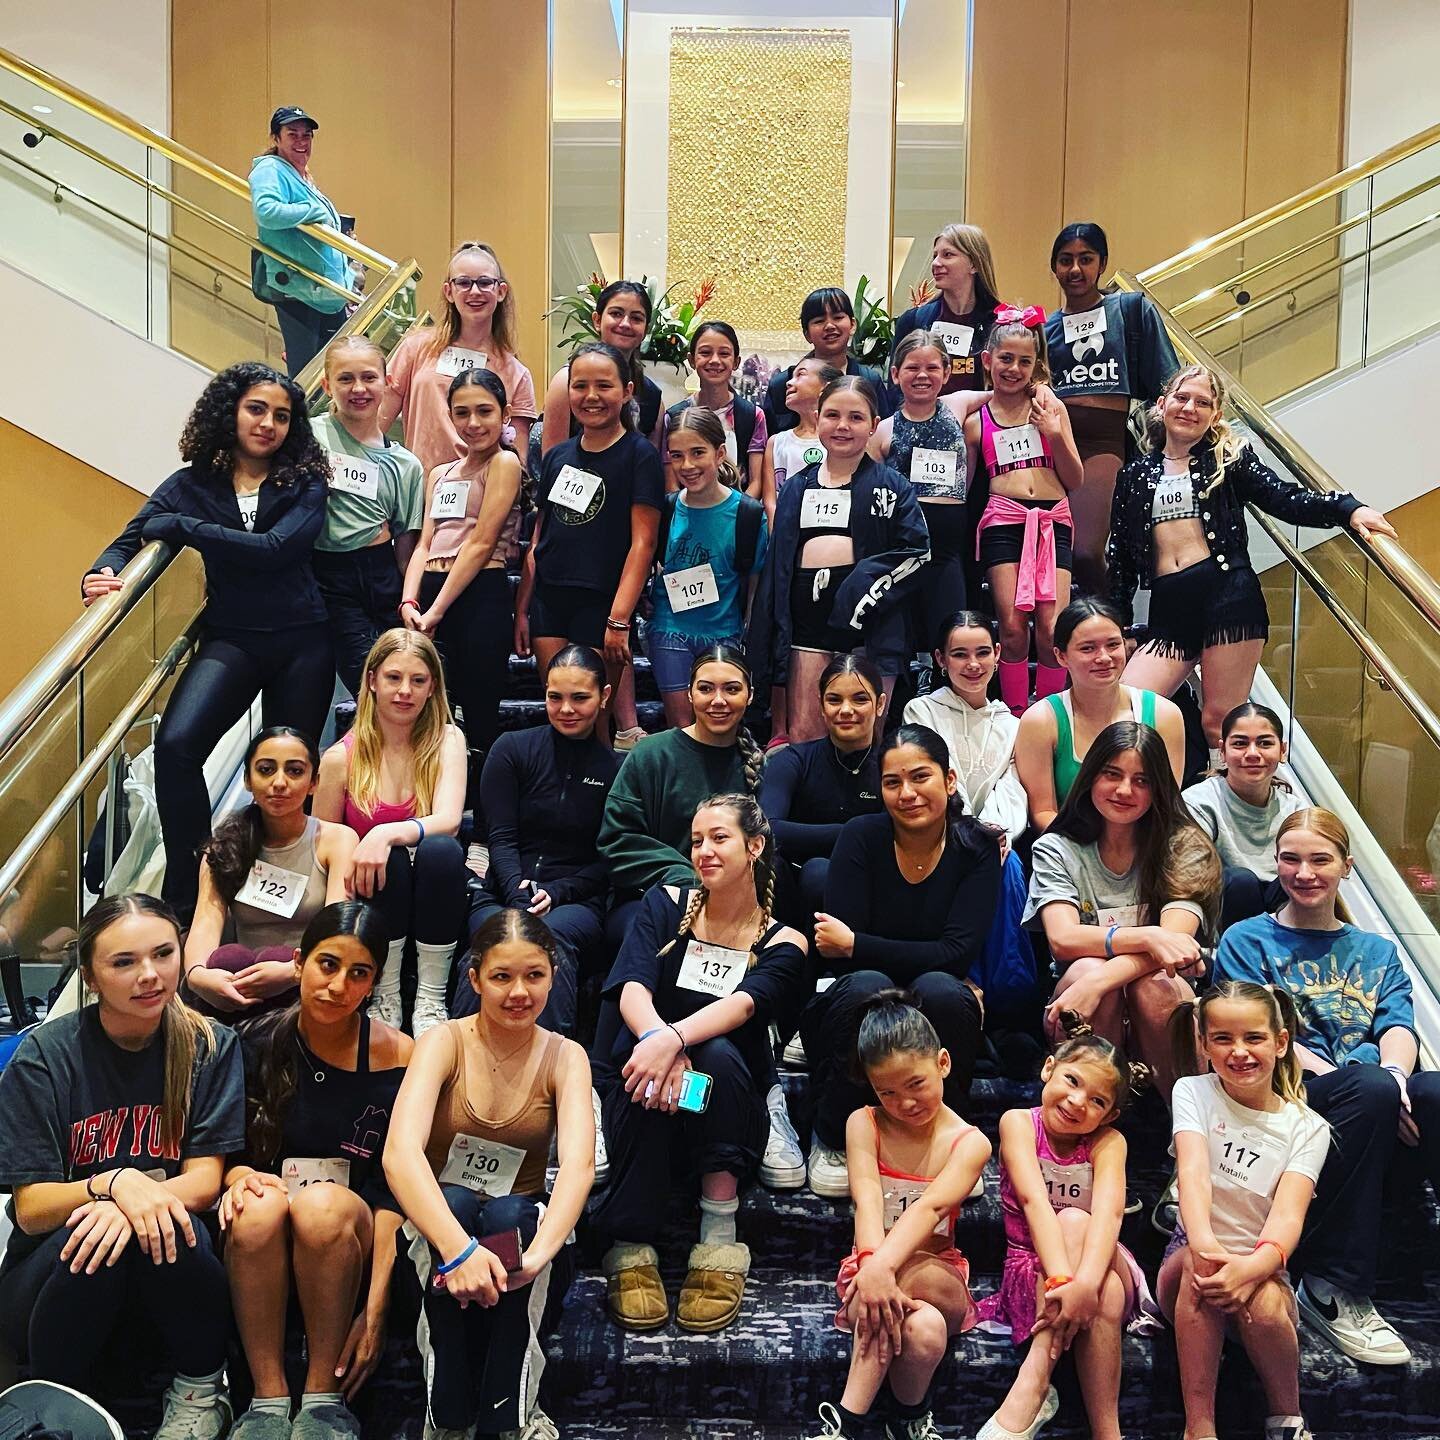 Thank you @heat_convention for a wonderful weekend celebrating dancers for their passion, their drive, and their uniqueness! Congratulations to Team AHD for all you achieved ✨❤️&zwj;🔥✨ #ahdlove